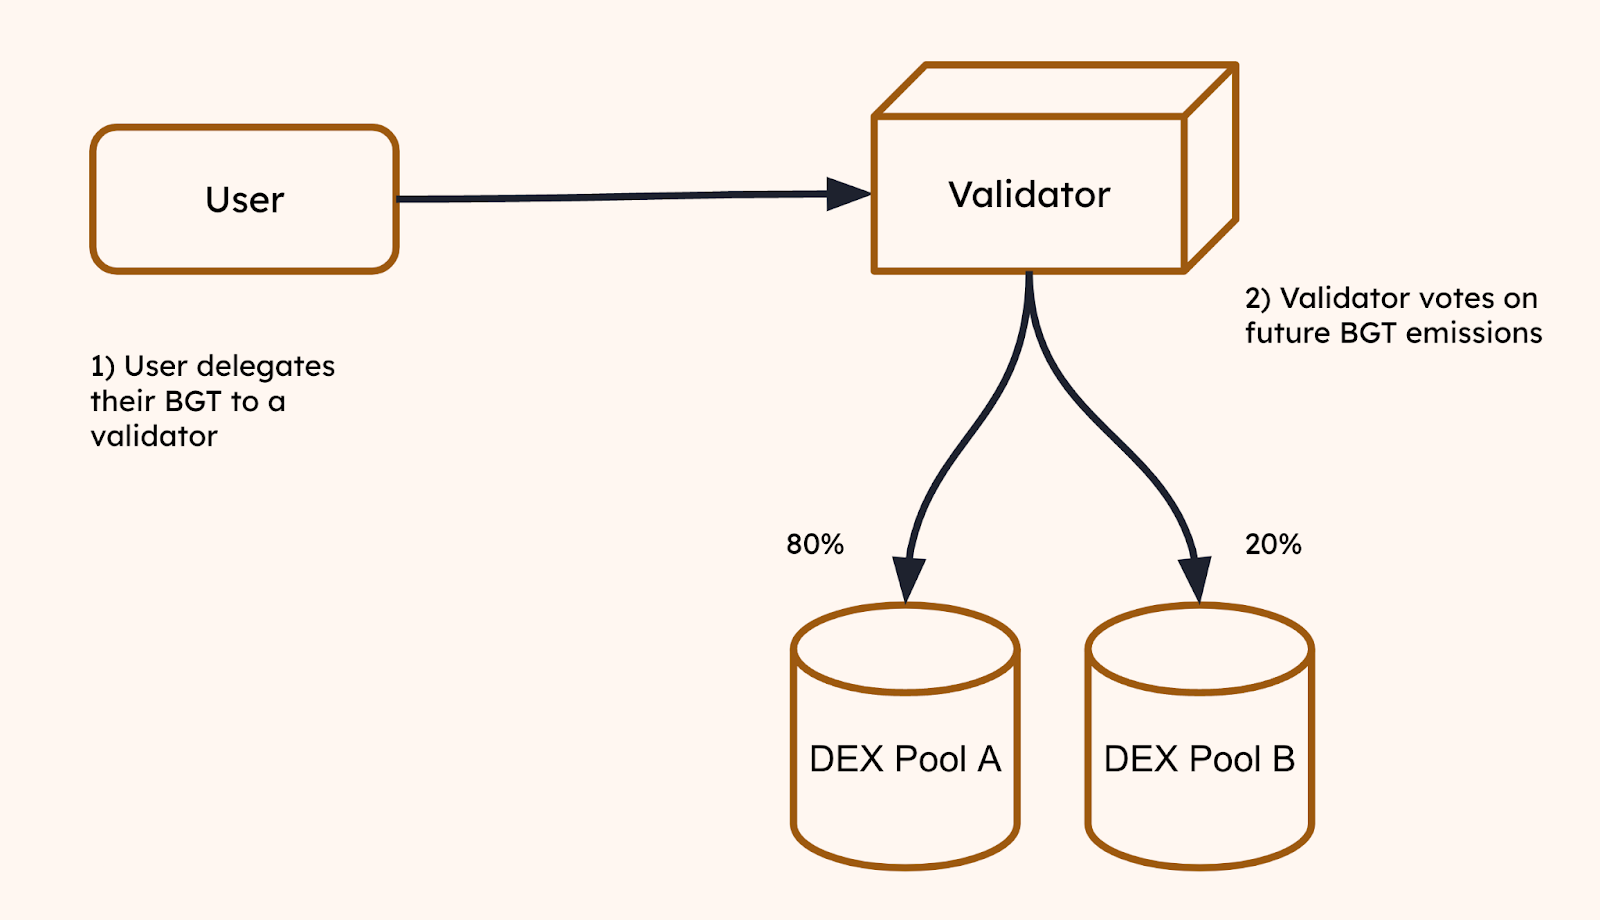 Once a user acquires the BGT governance token, they must choose which validator they wish to delegate (by bonding or staking their assets within) their assets to. In turn, a validator’s BGT stake weight is used to determine how many blocks the specific validator produces out of all validators operating on the network as well as what percentage of future BGT emissions they can set via the voting process. (Image Credit: BGT Delegation via Berachain Documentation)